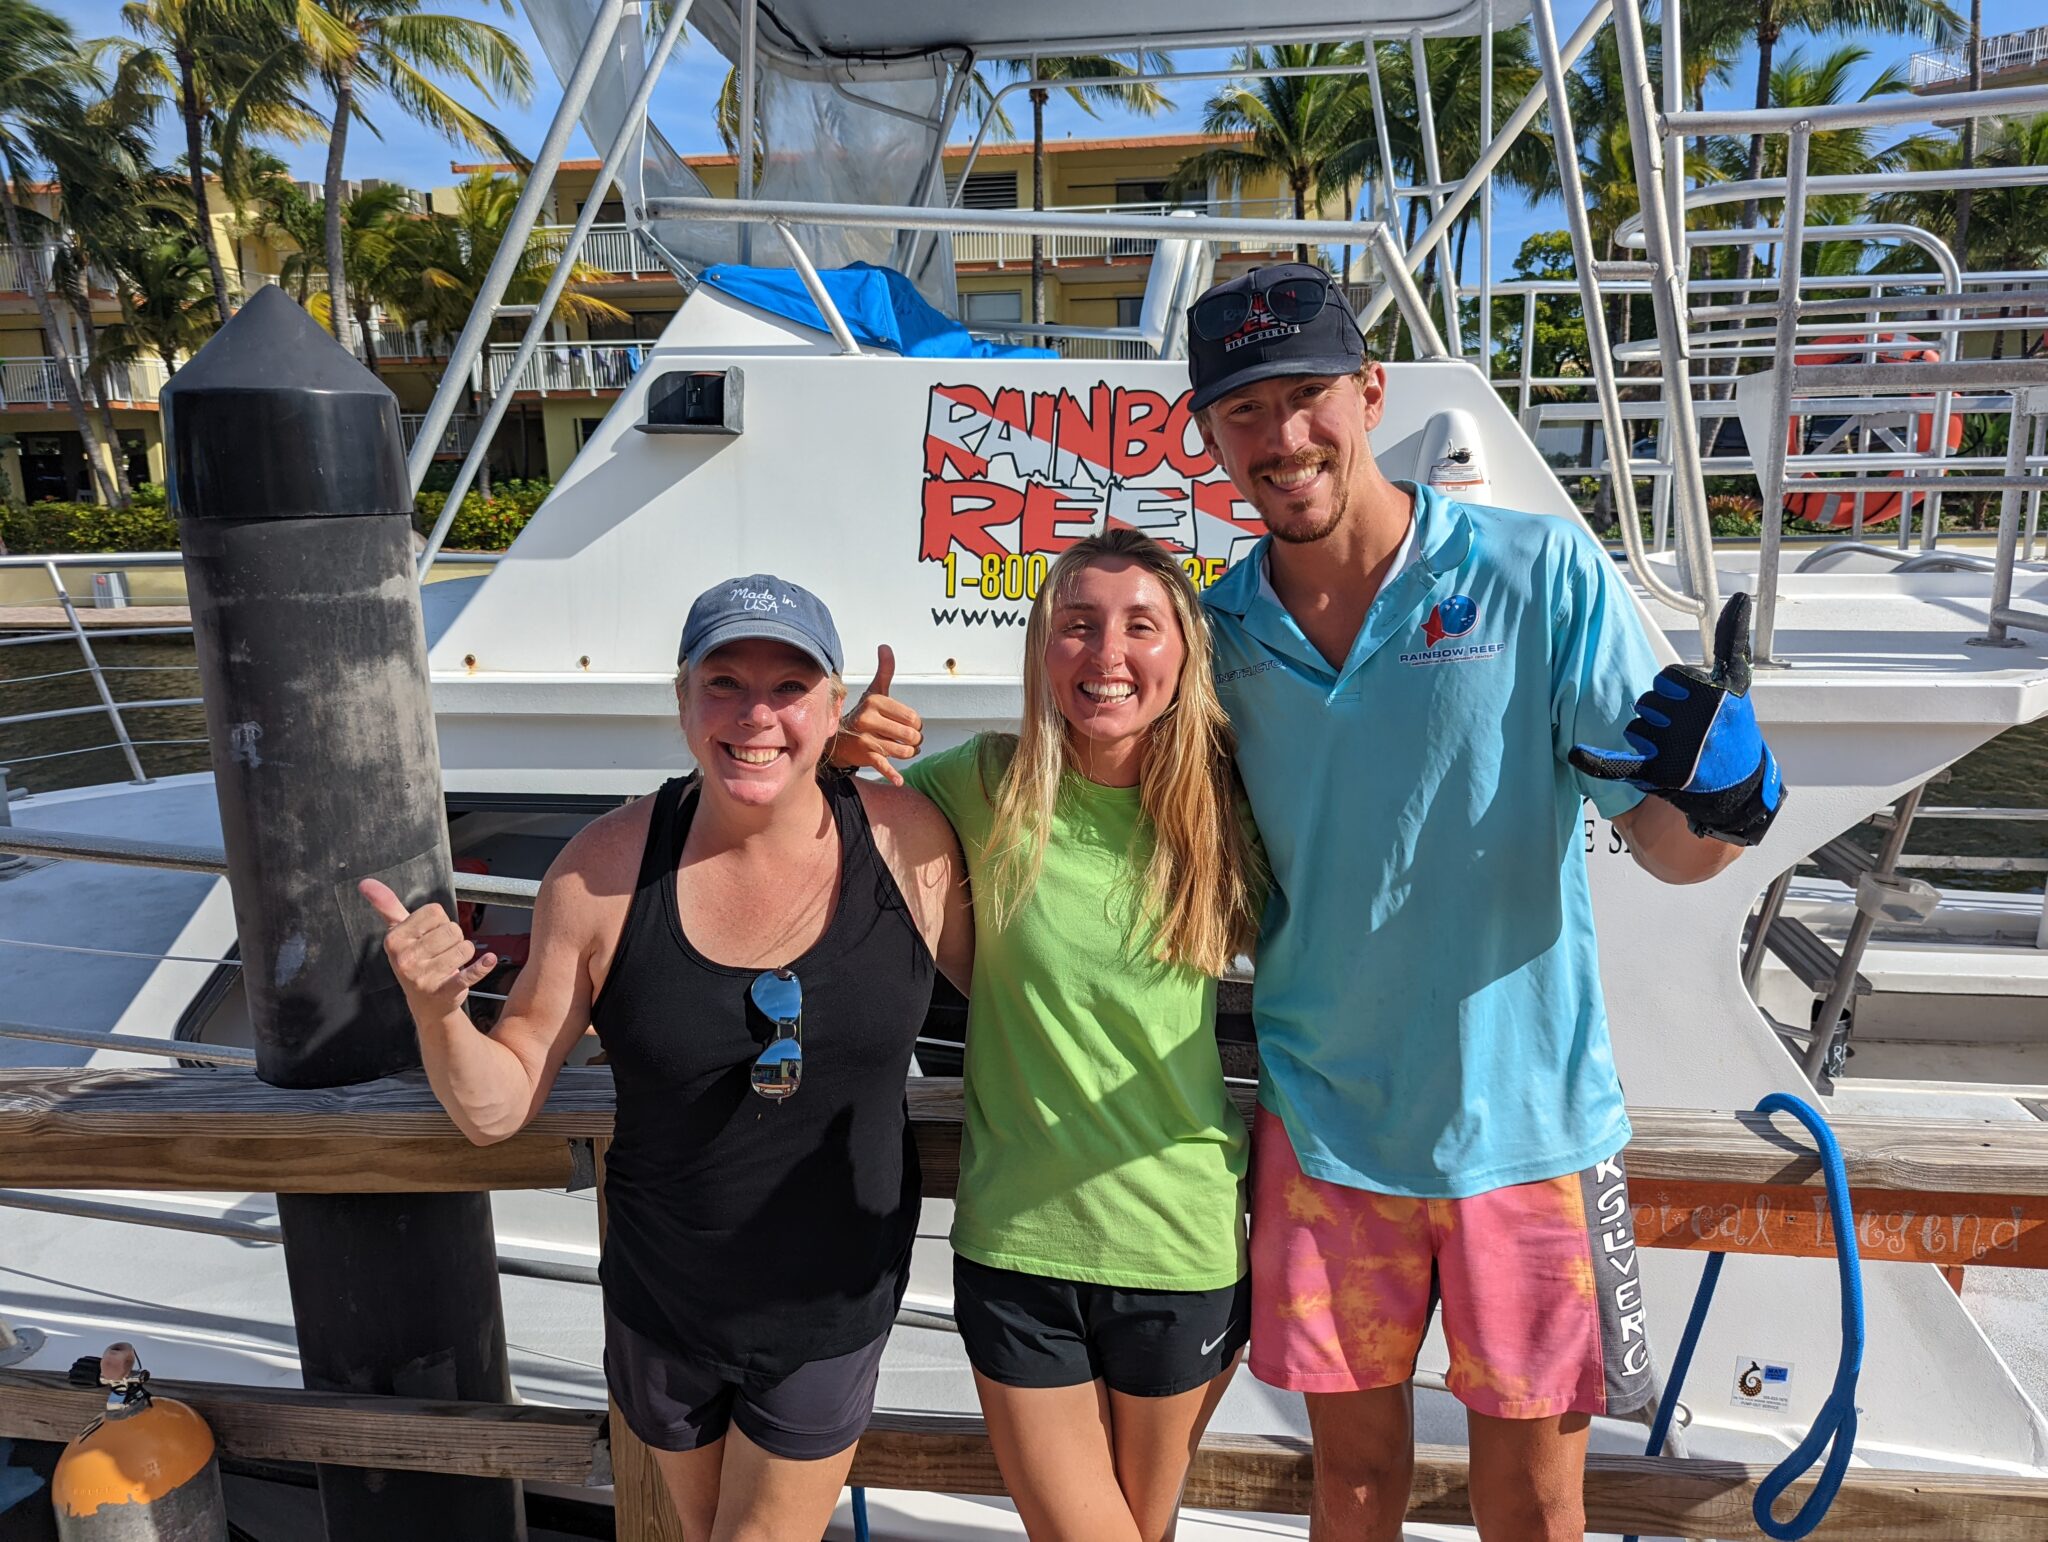 Rainbow Reef dive professionals are all smiles after a succesful Dive Against Debris